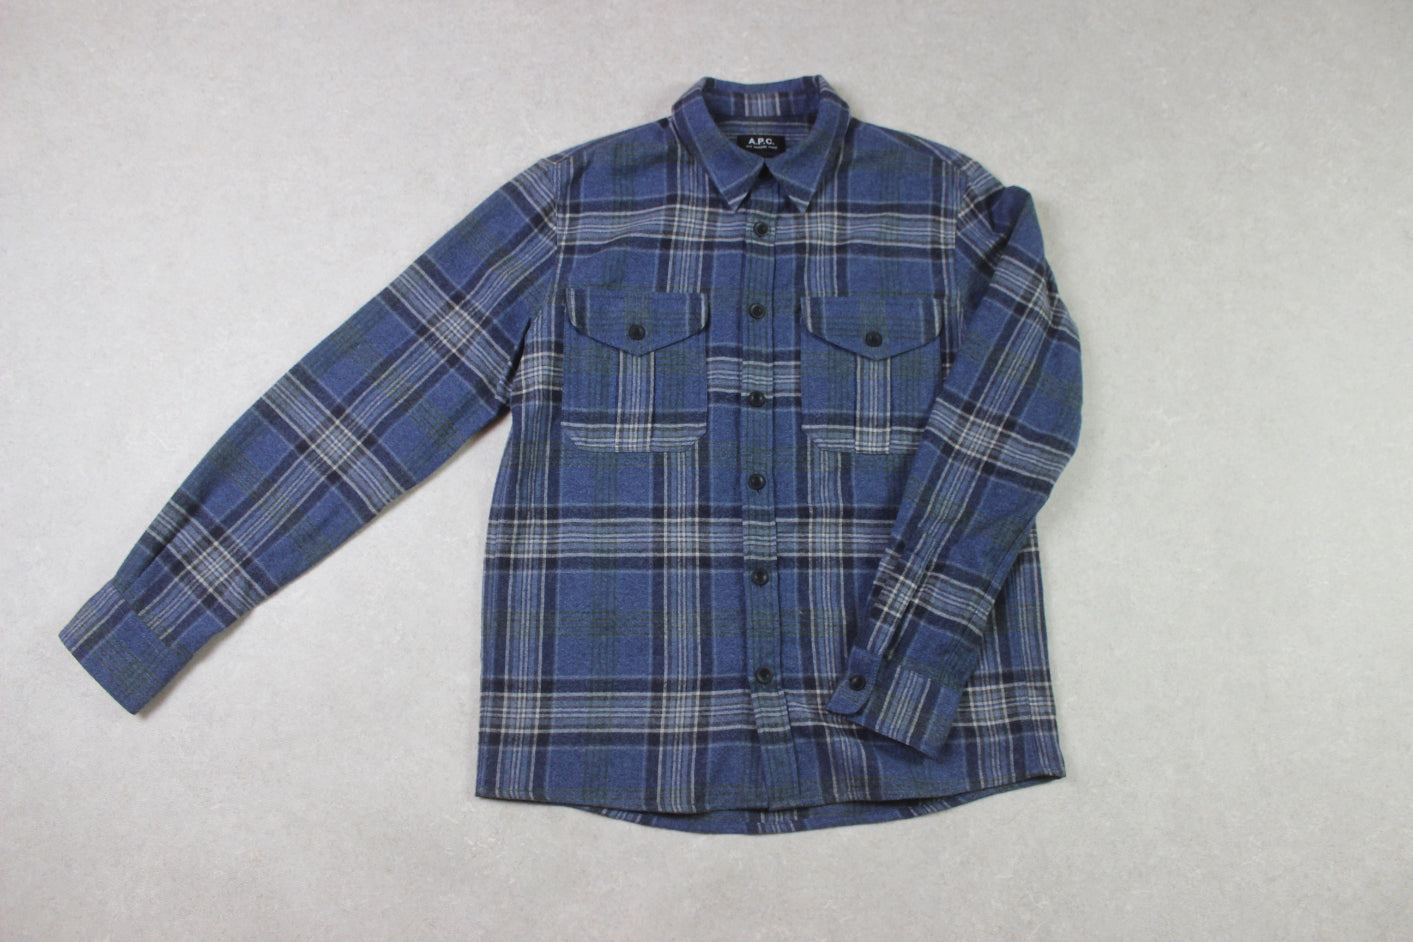 A.P.C. - Flannel Shirt - Blue Check - Small